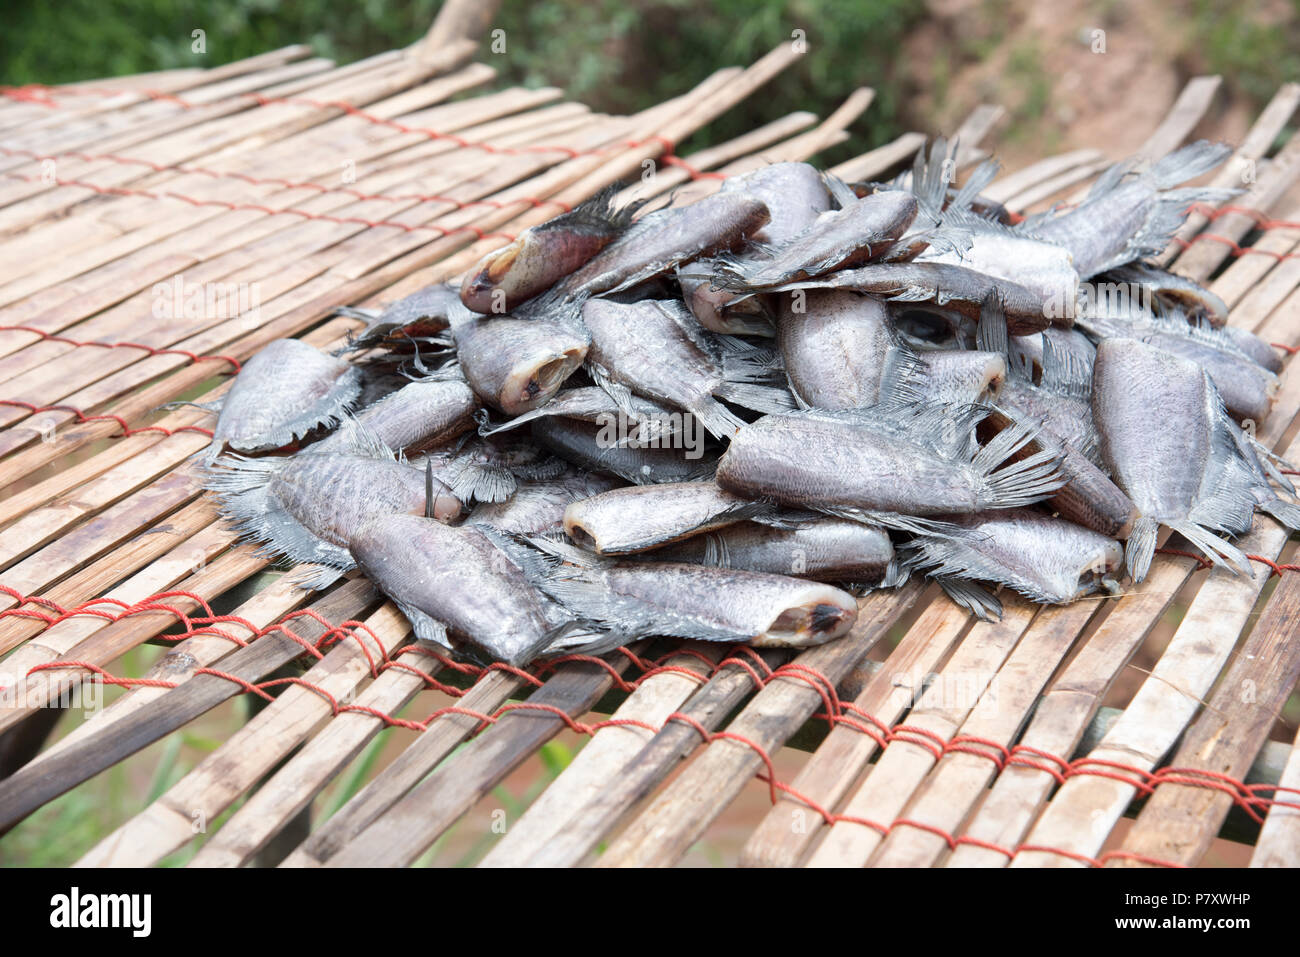 Many dried salted fish called 'Trichogaster pectoralis' on the bamboo sheet, Headless fish on the bamboo sheet Stock Photo